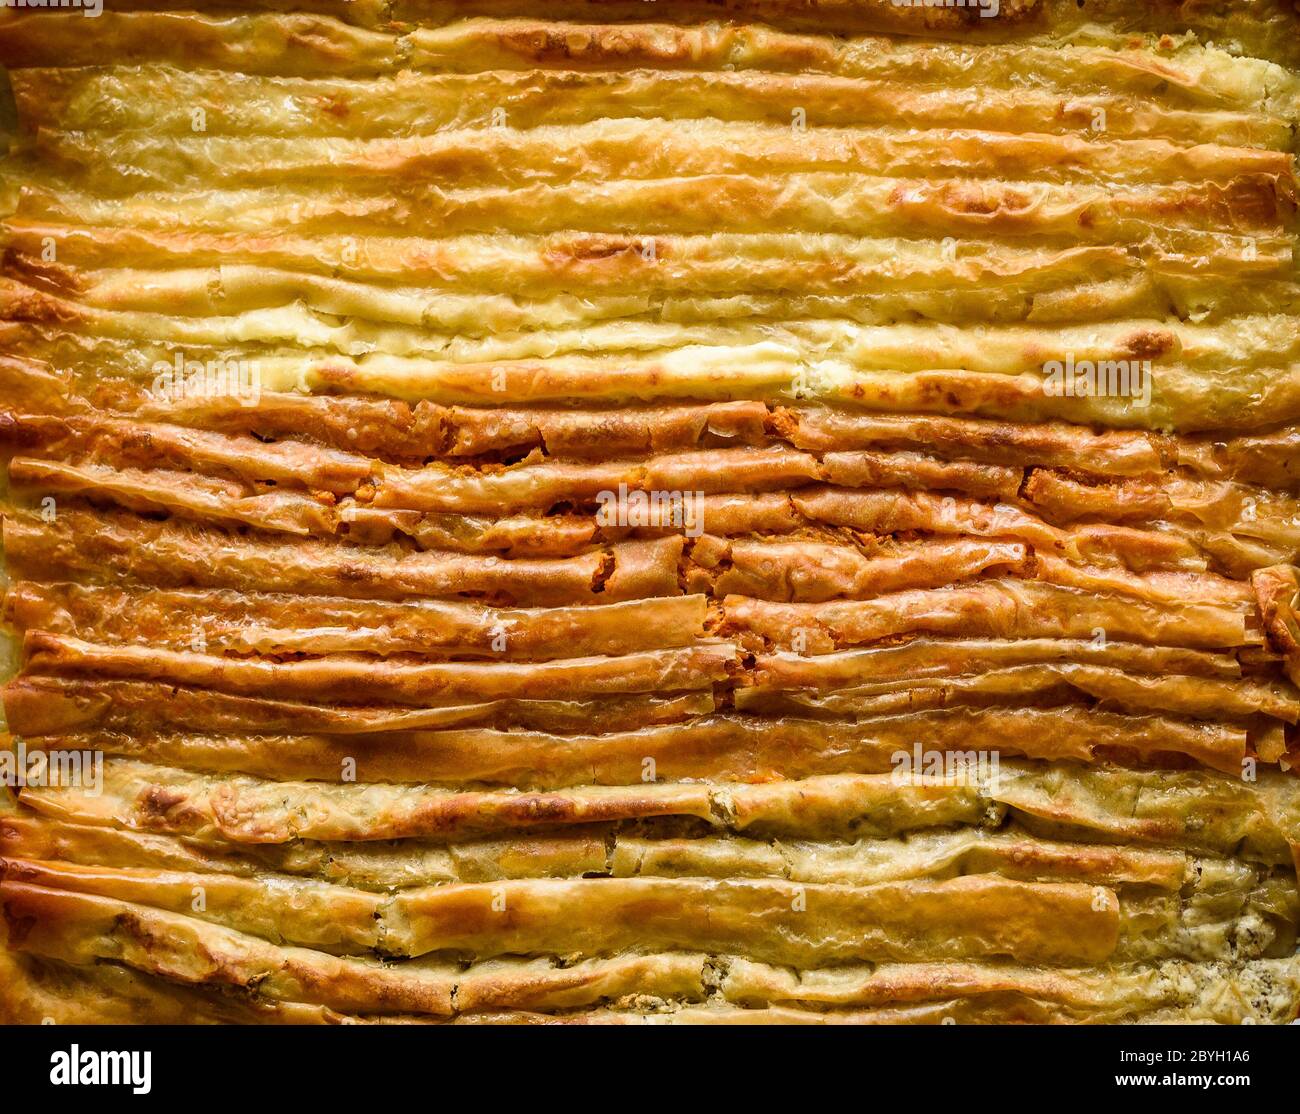 Baked homemade traditional Balkan, Bosnian, Greek, Turkish,  Serbian dish burek. Delicious homemade pastry ready to eat. Domestic pastries on backing Stock Photo